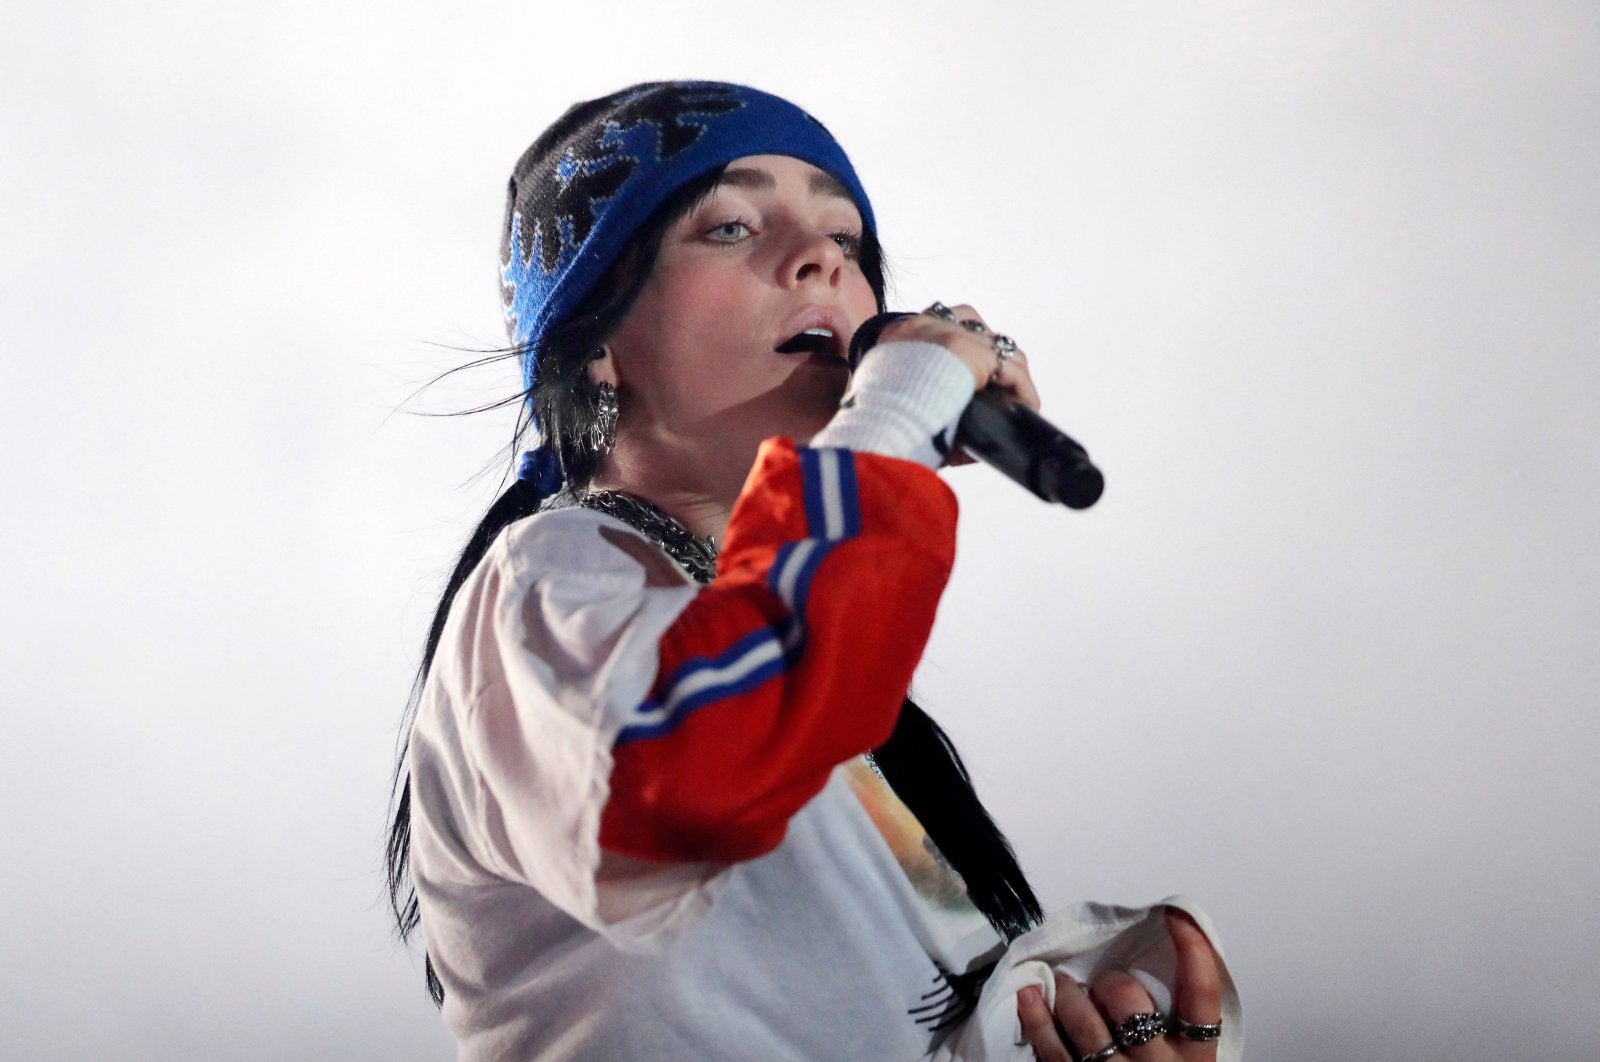 U.S. singer Billie Eilish performs on stage at the Lollapalooza 2023 music festival in Santiago, Chile, March 17, 2023 (AFP Photo)